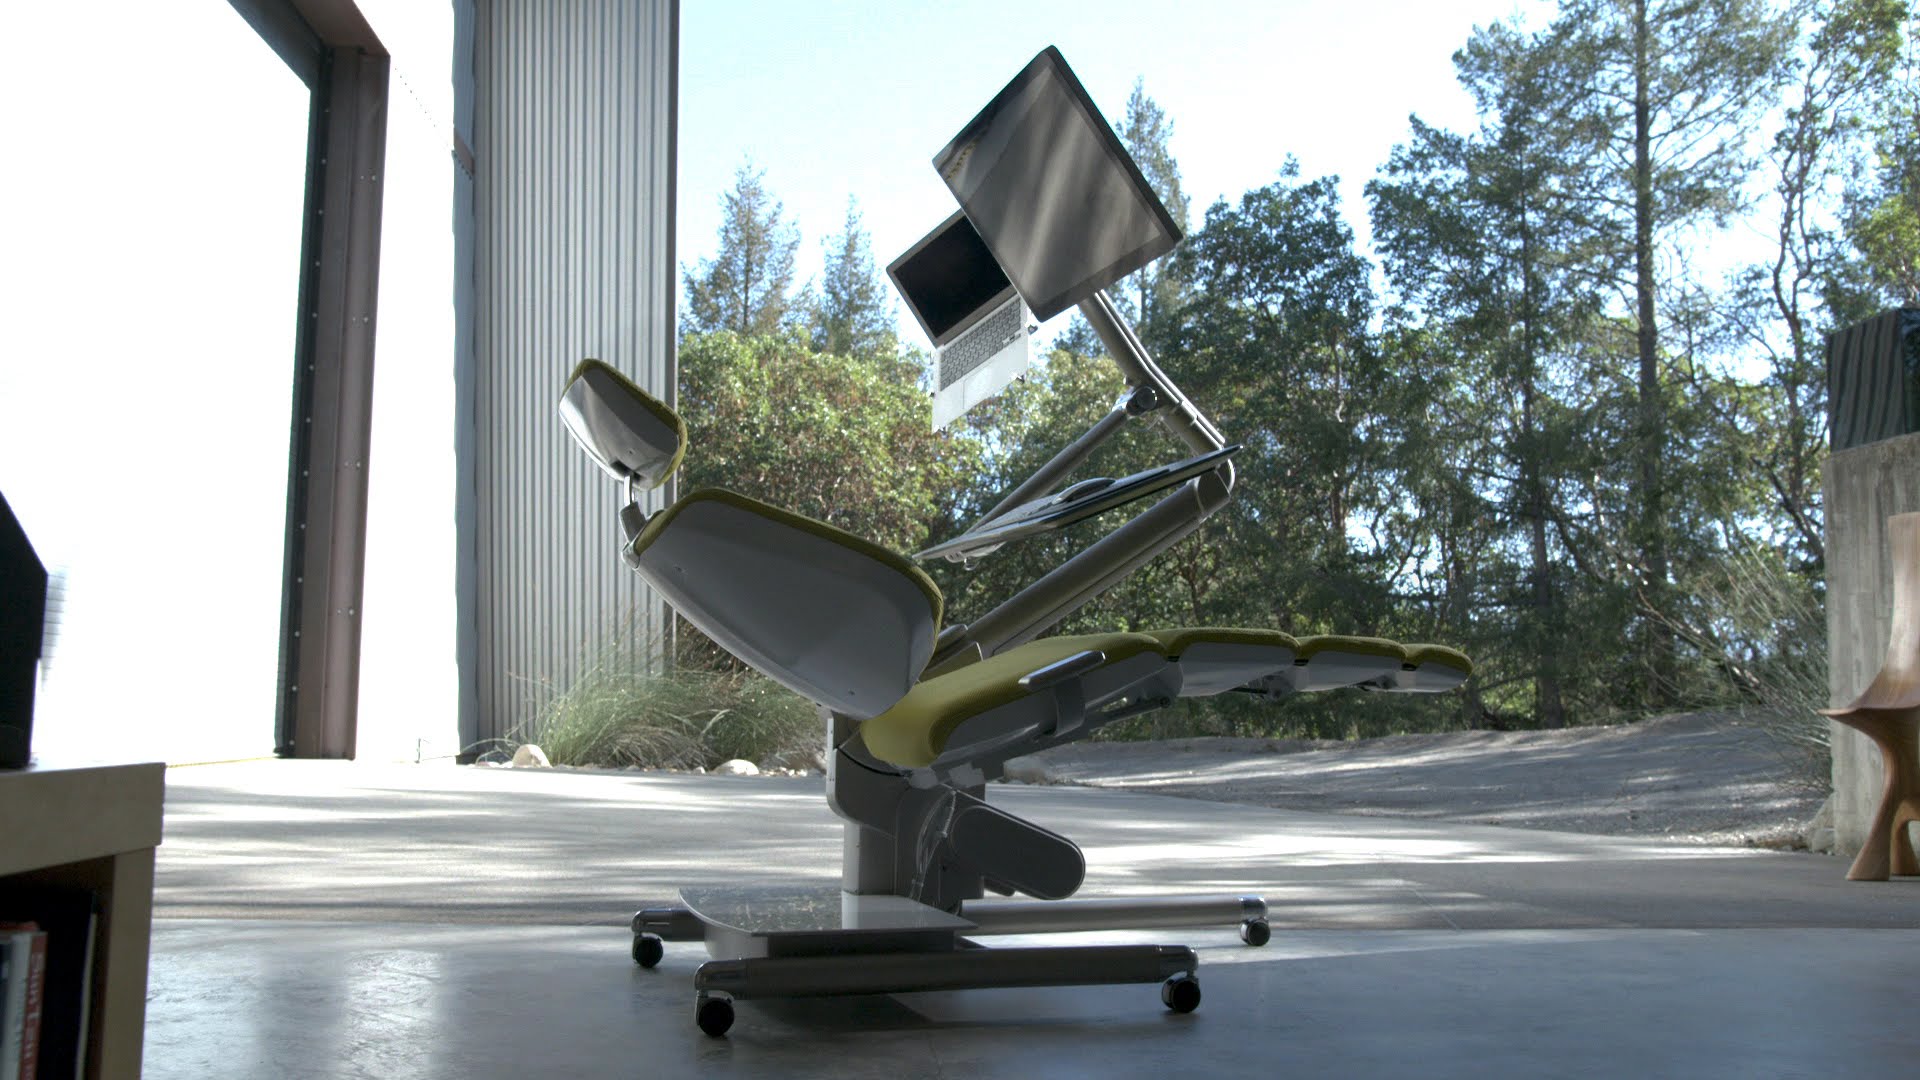 Automated Desk-and-Chair That Feels Like Working on a Cloud